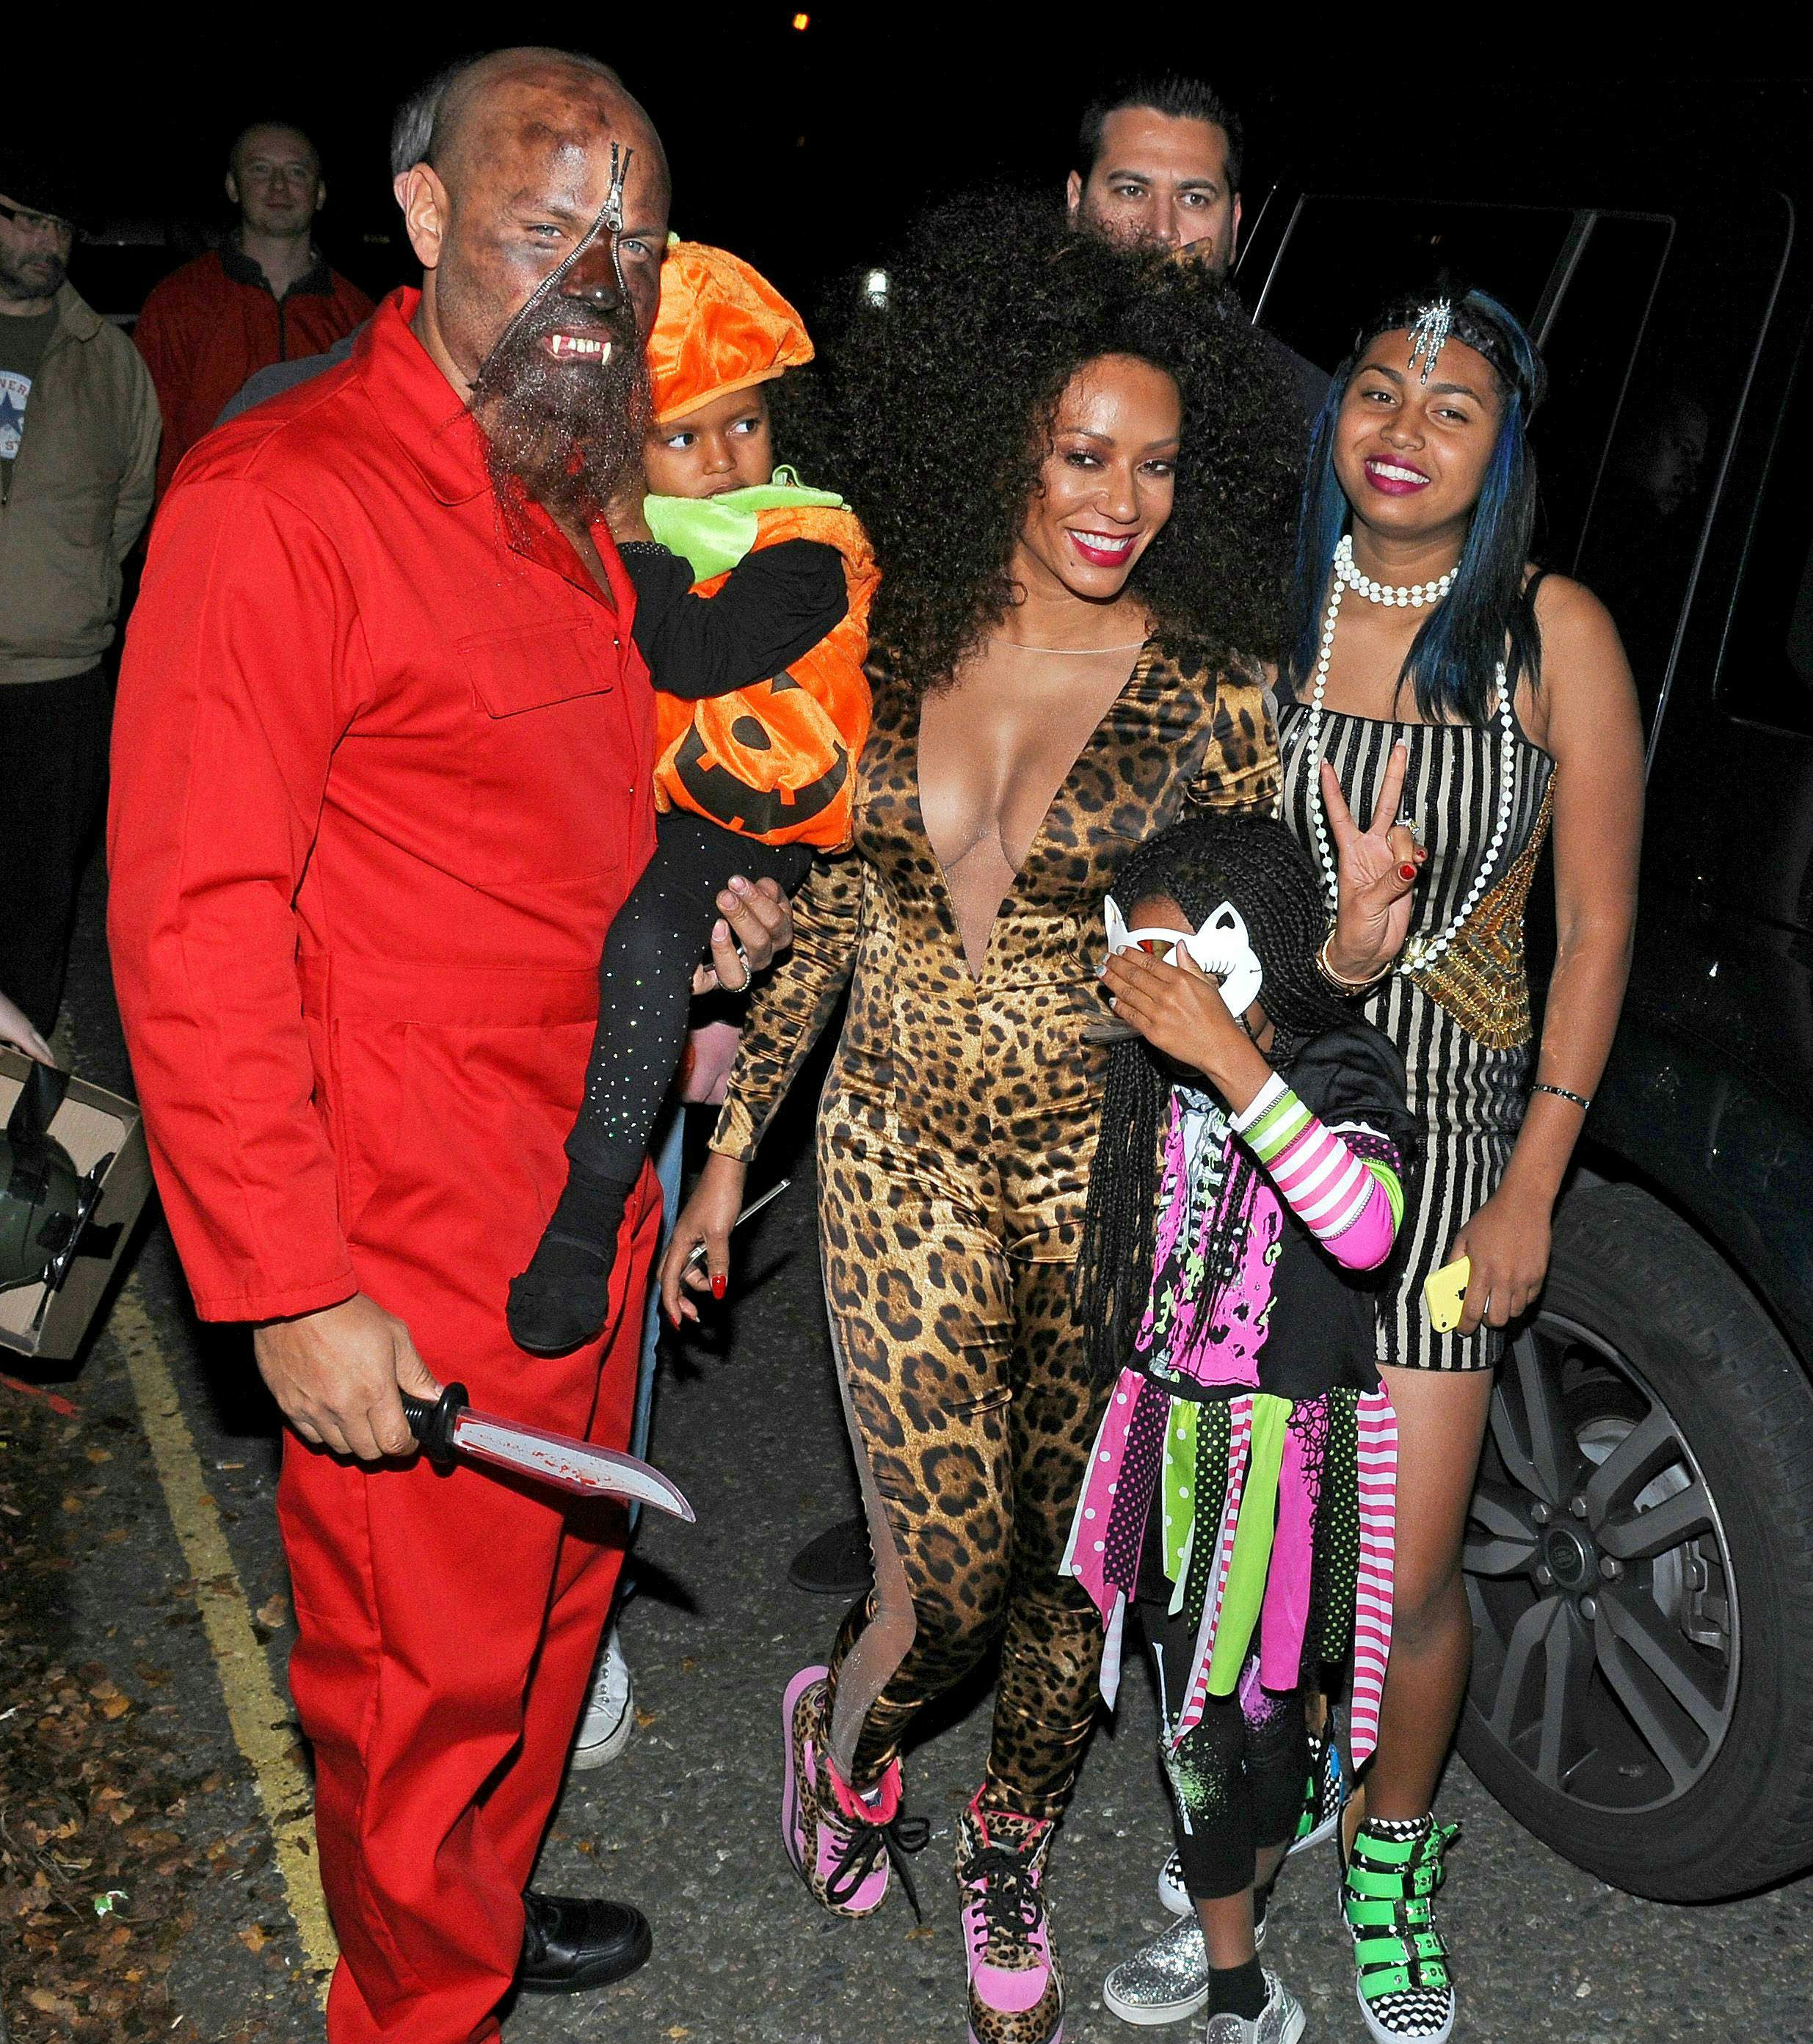 Mel B dresses up as herself in Scary Spice costume for Halloween